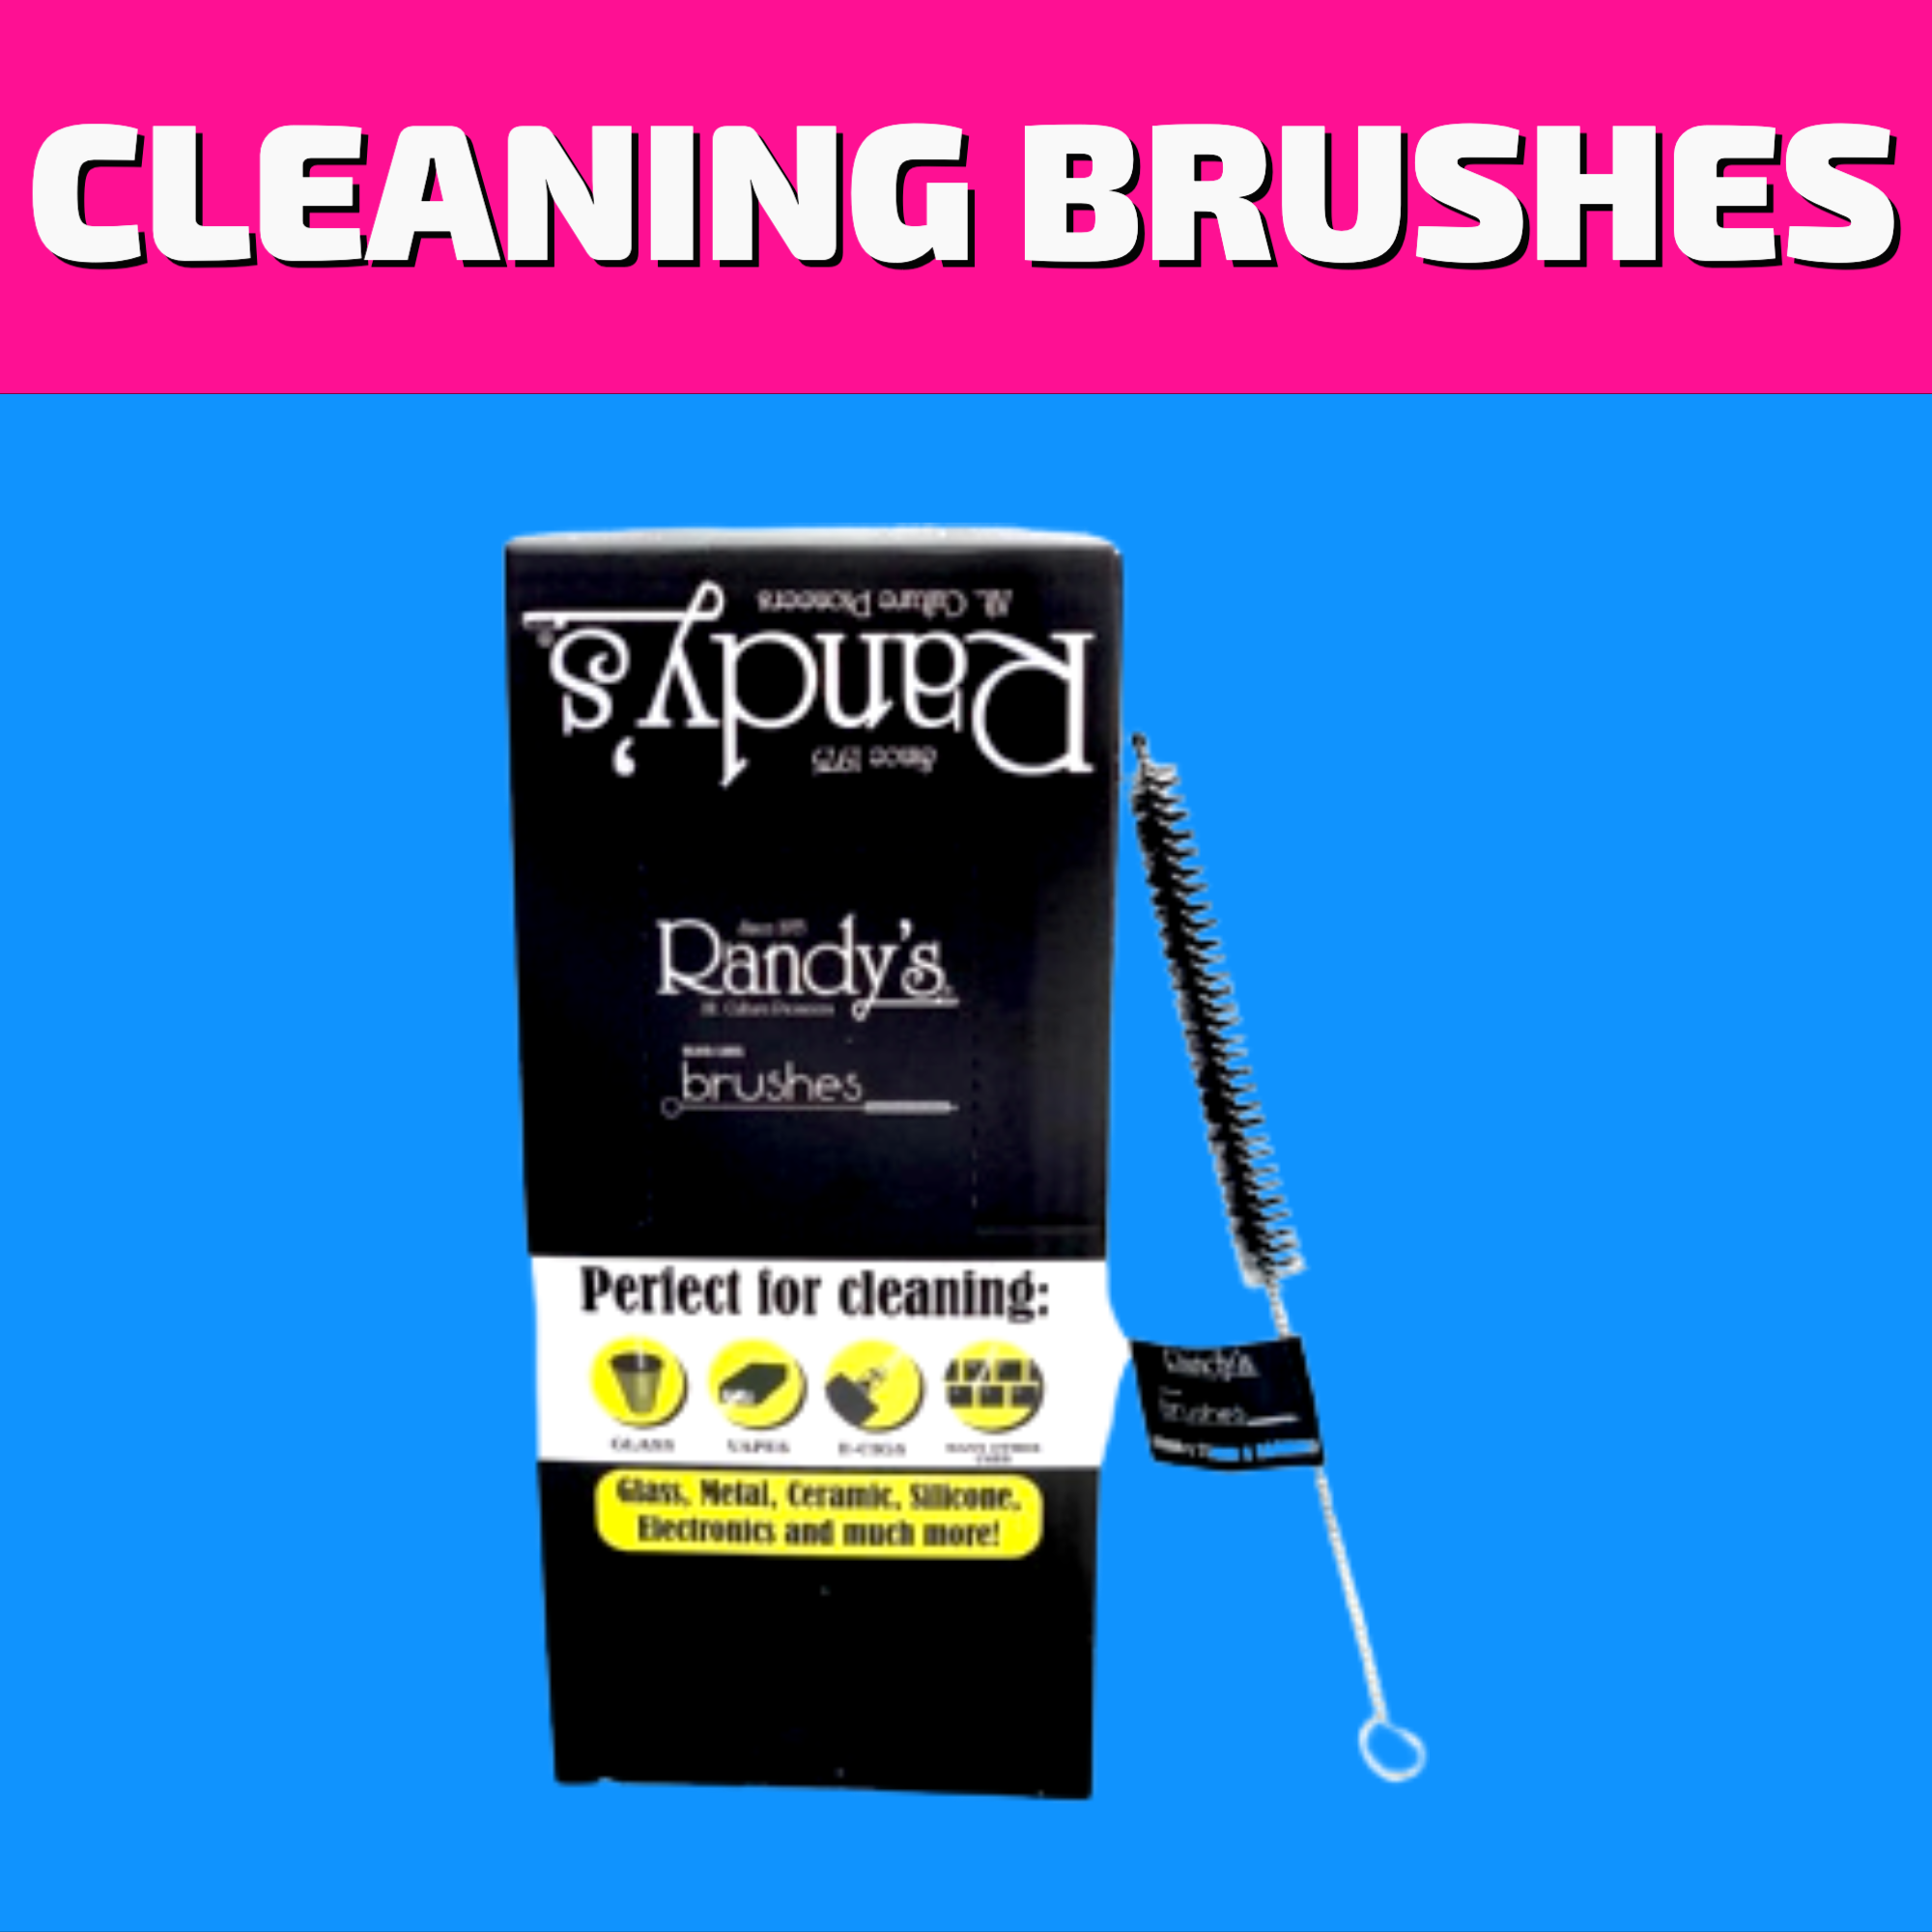 Shop Winnipeg's best selection of Bong Cleaning Brushes and Bong Cleaners for same day delivery or buy them in-store.   